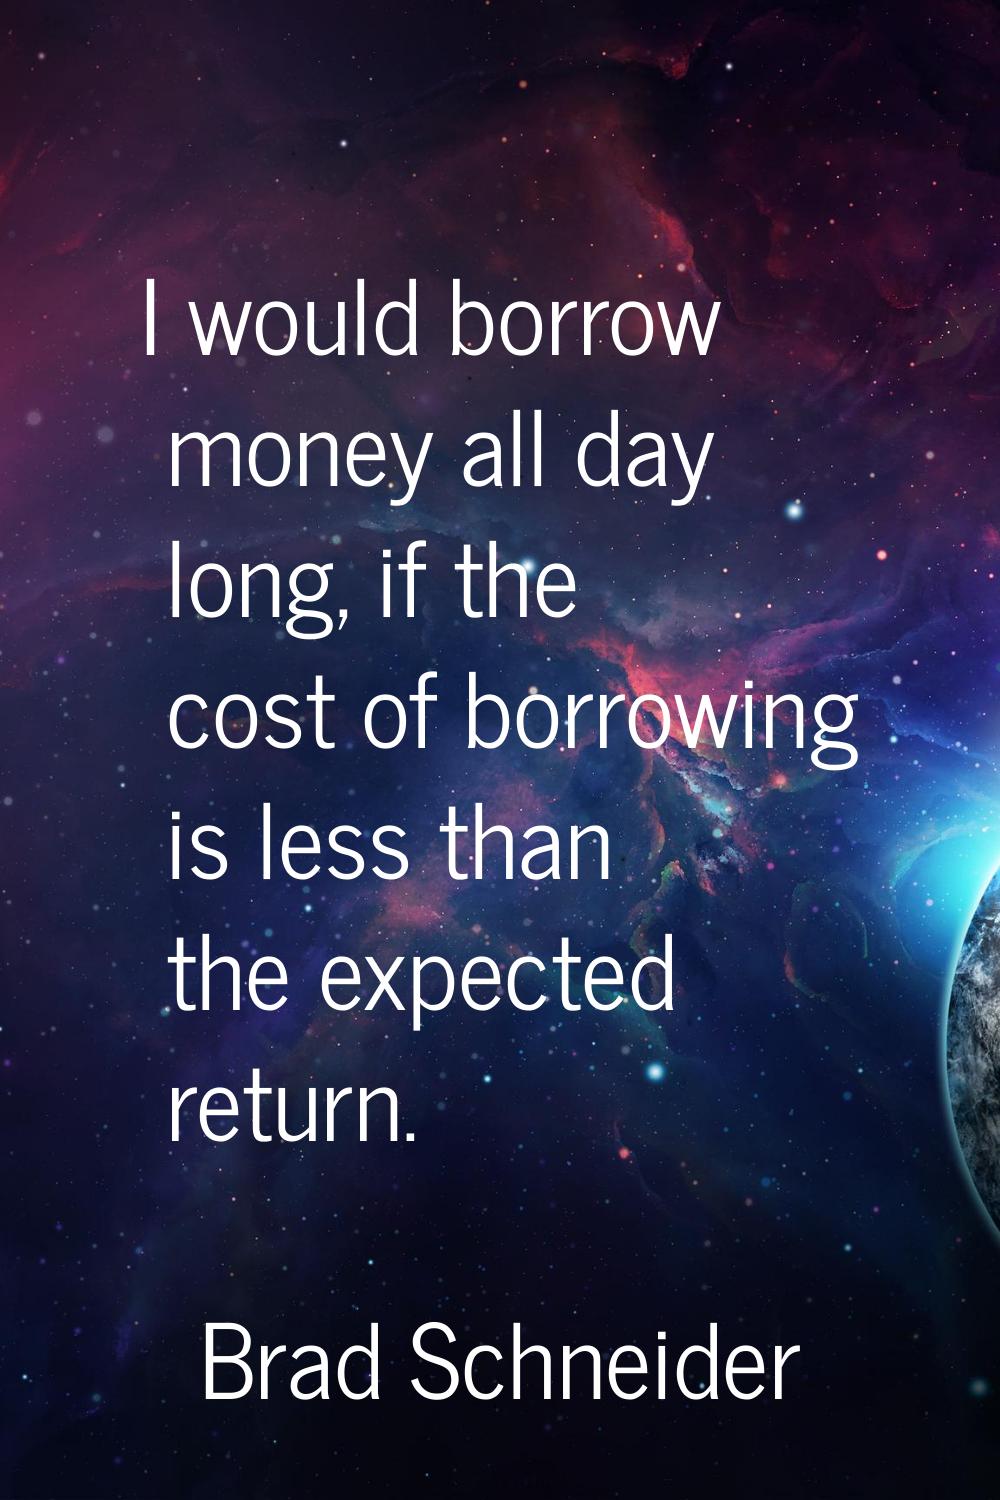 I would borrow money all day long, if the cost of borrowing is less than the expected return.